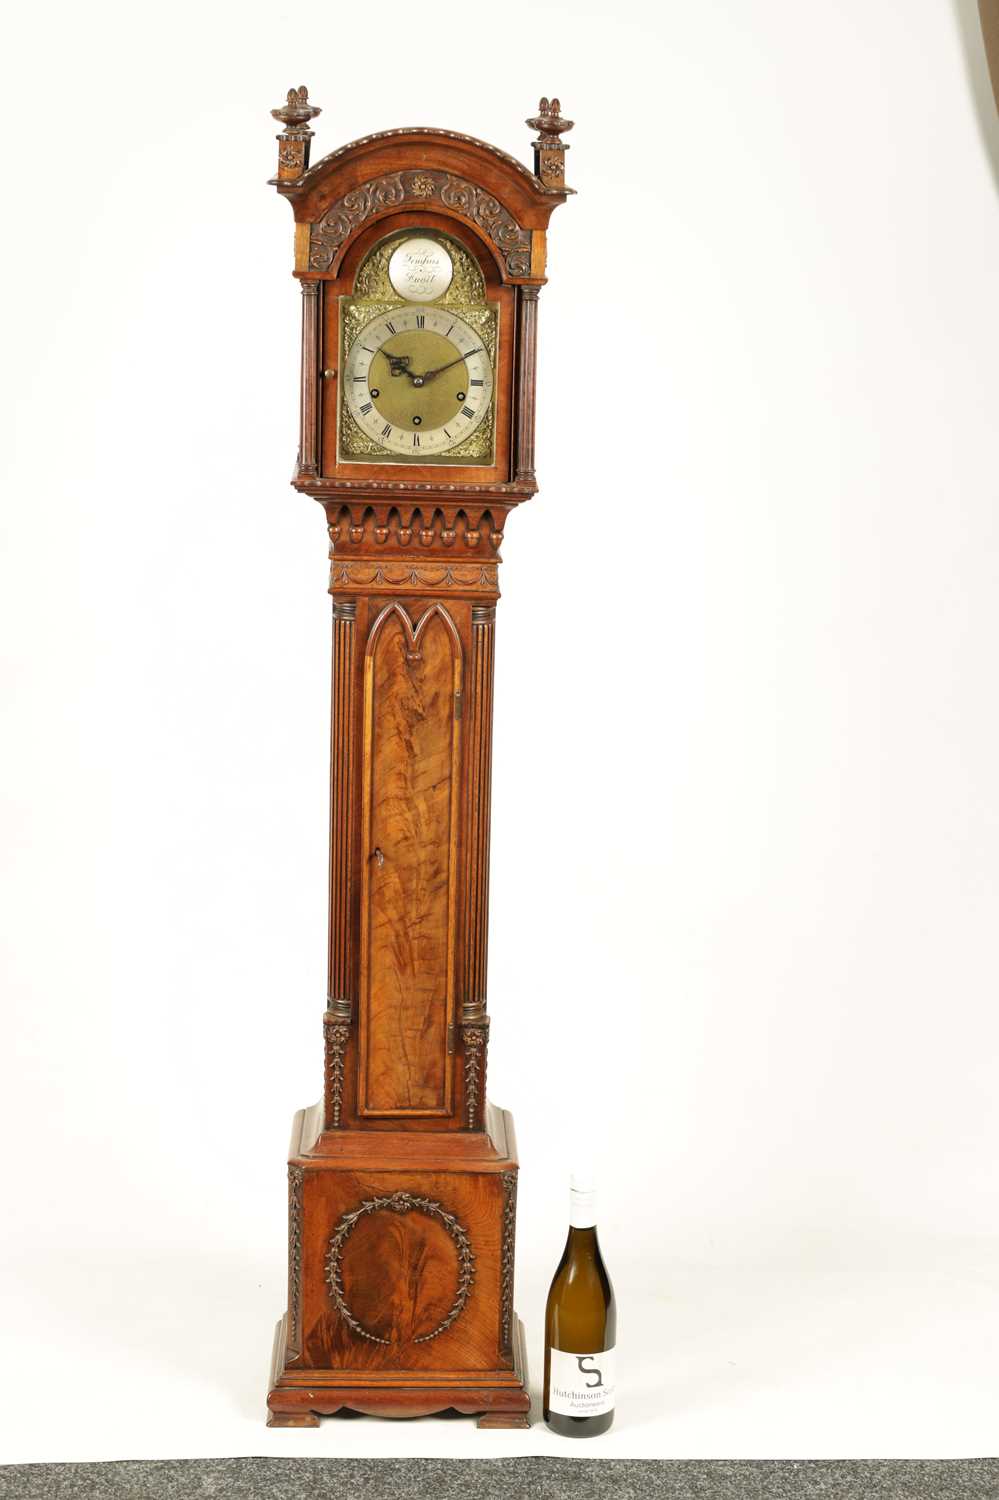 AN EARLY 20TH CENTURY CHIPPENDALE STYLE MAHOGANY THREE TRAIN QUARTER STRIKING GRANDMOTHER CLOCK - Image 7 of 7